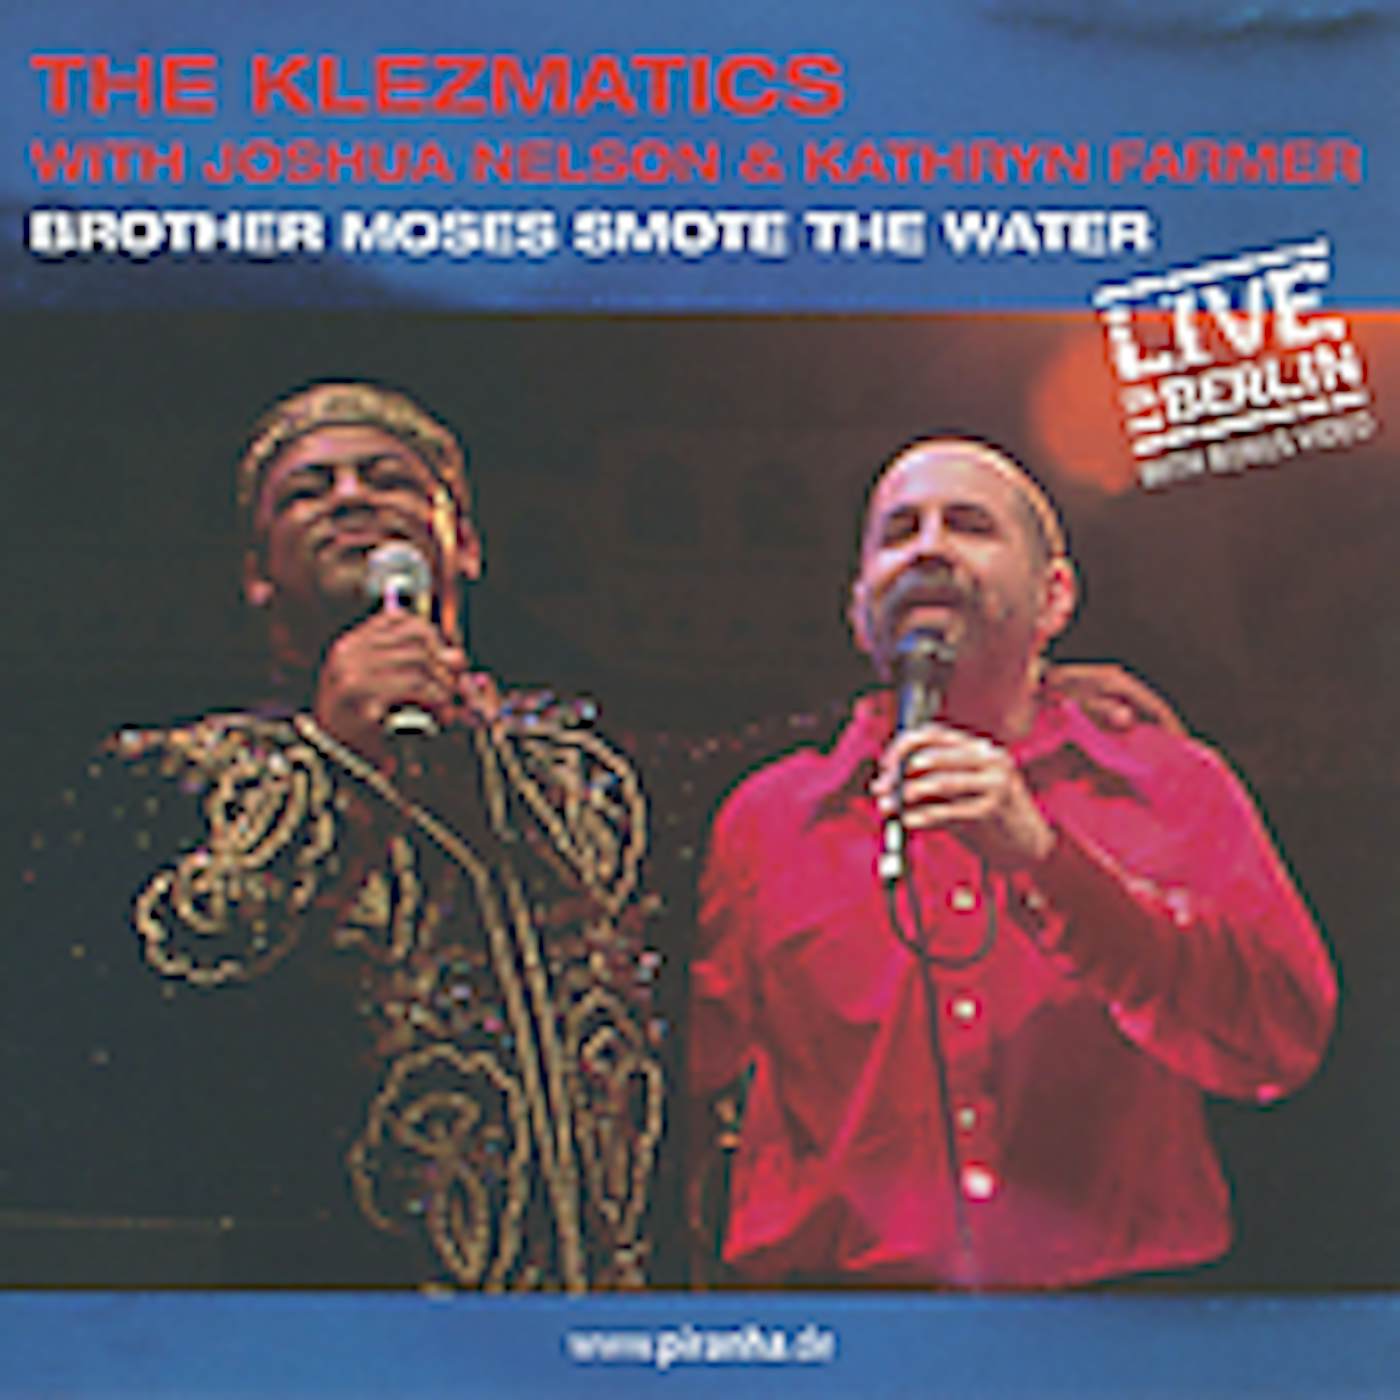 The Klezmatics BROTHER MOSES SMOTE THE WATER CD